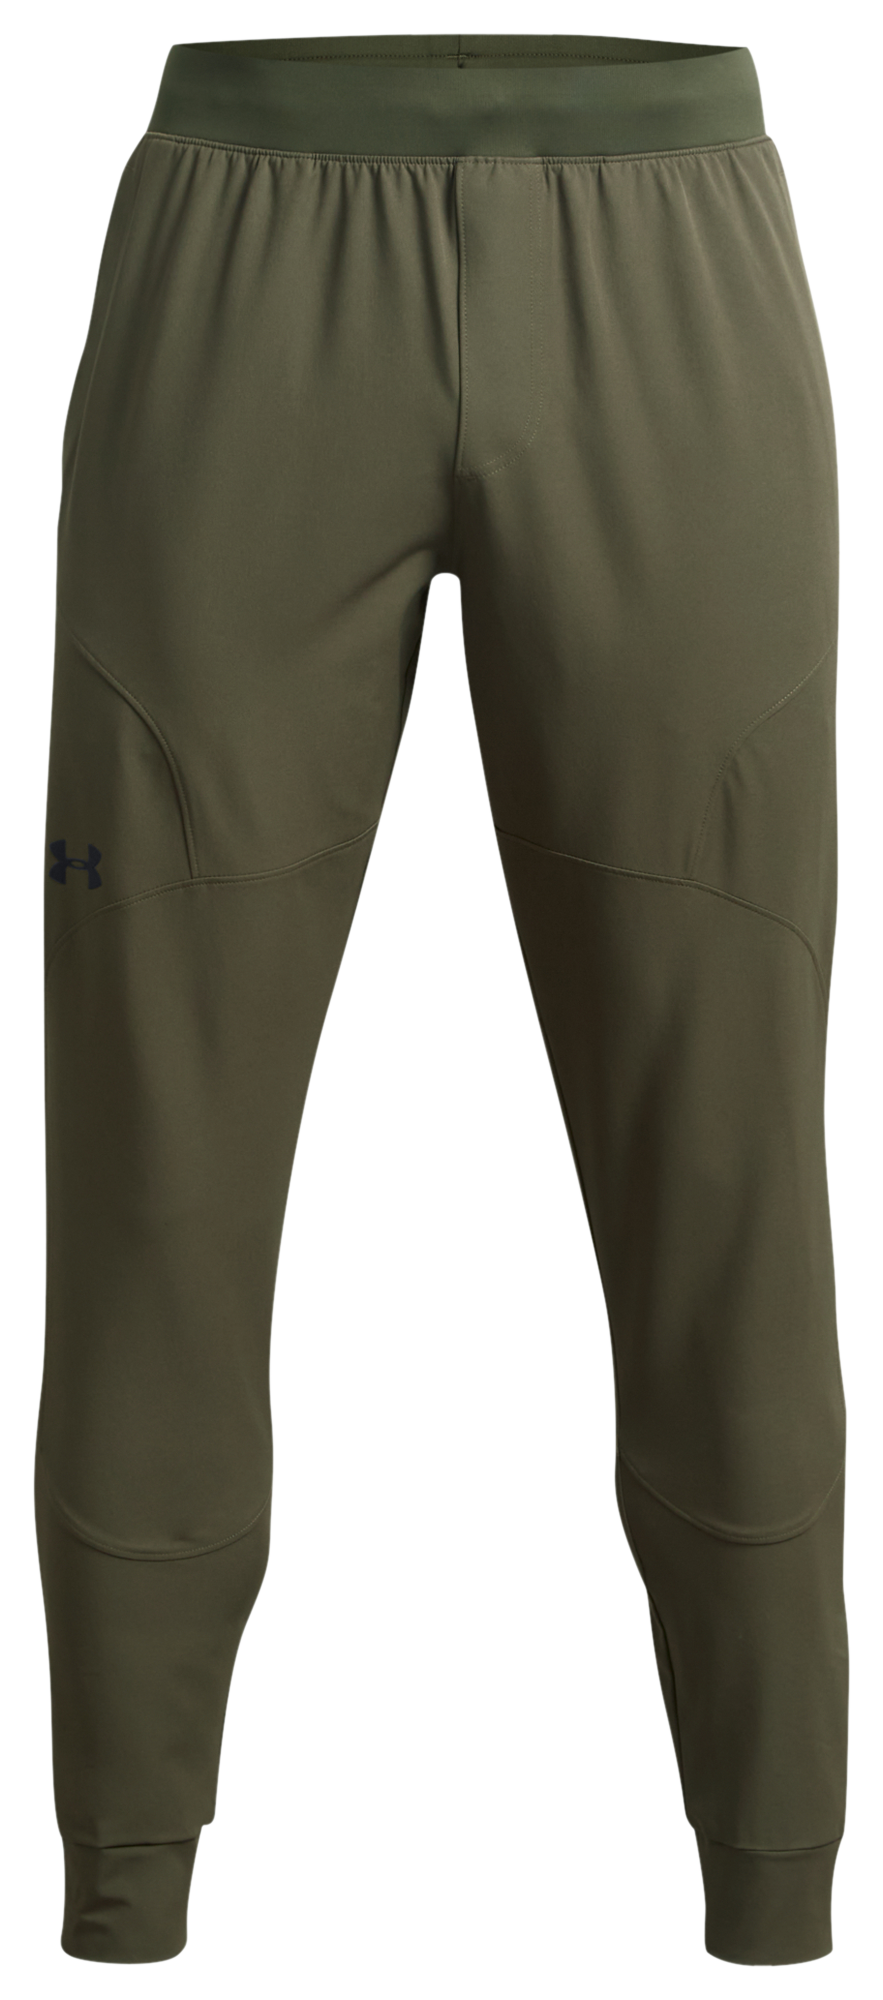 Under Armour Men's Unstoppable Joggers